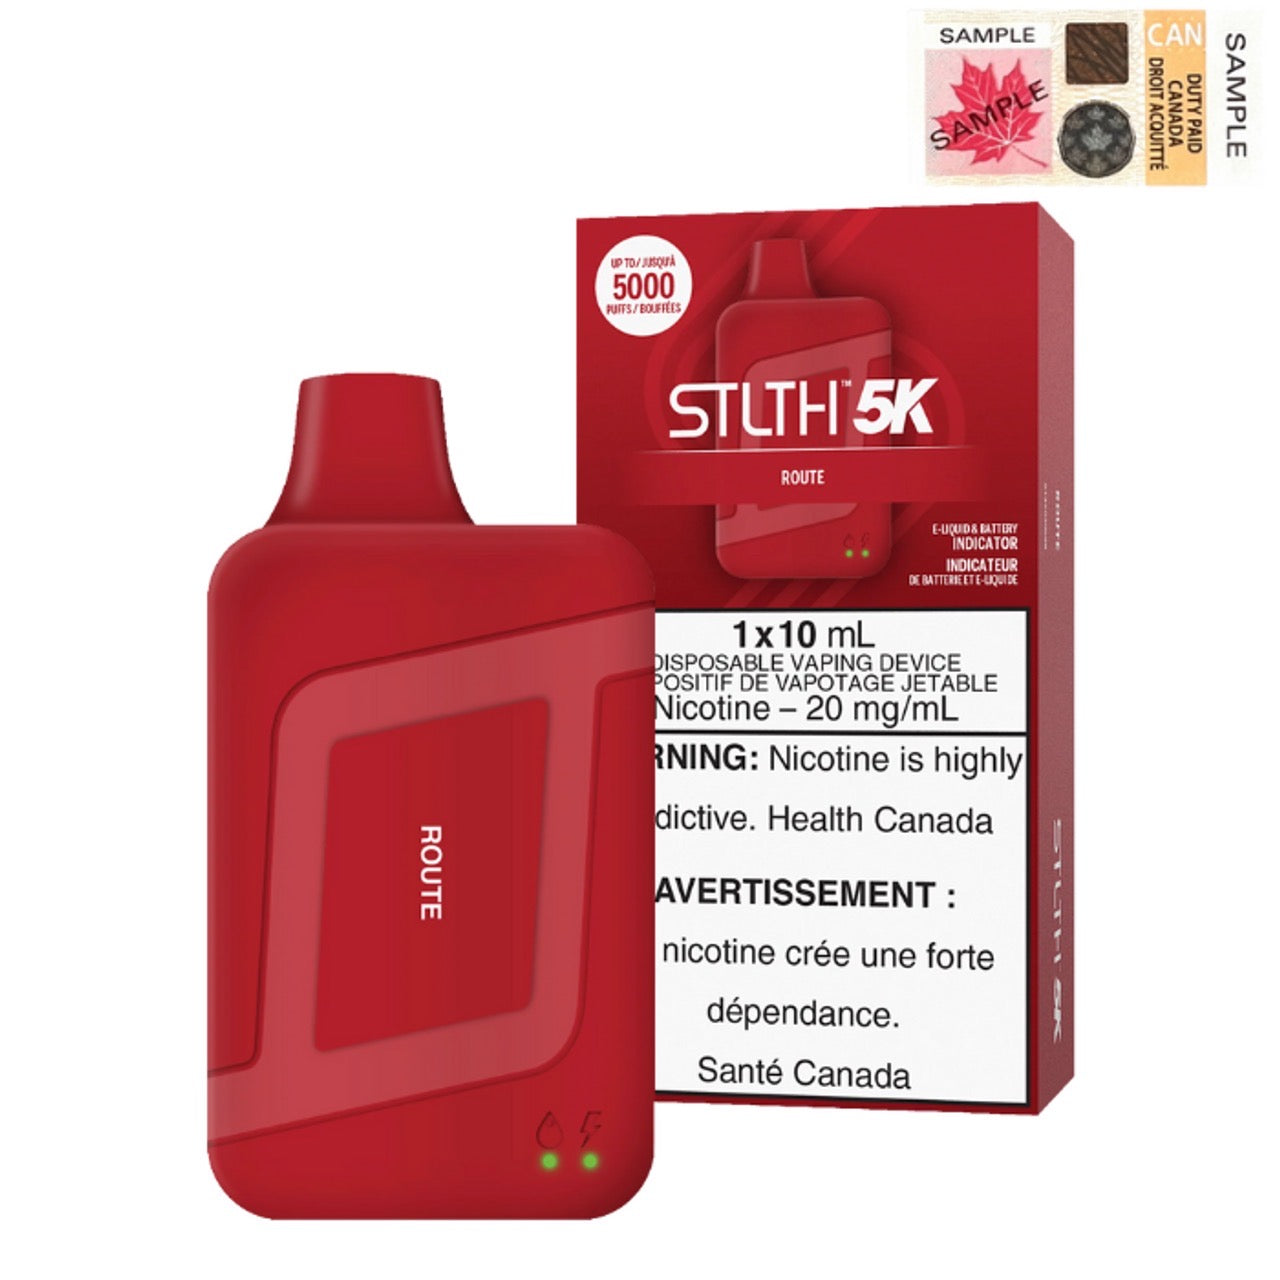 ROUTE - STLTH 5K - 20mg - 5ct - EXCISED